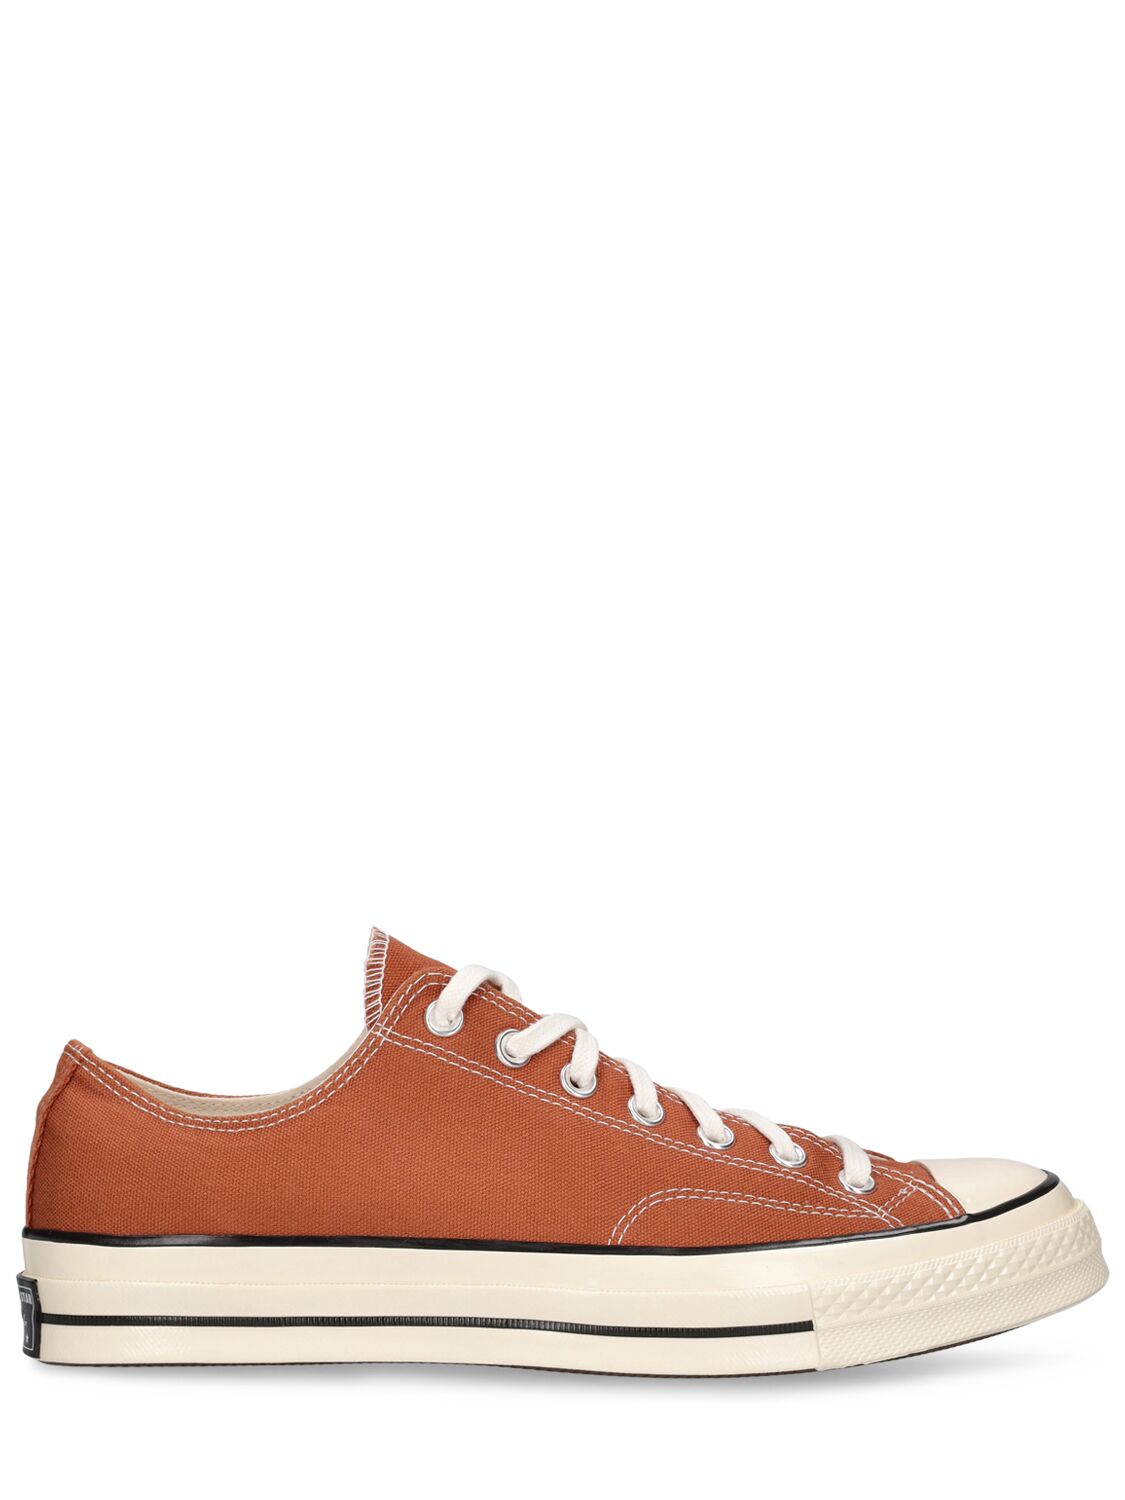 CONVERSE CHUCK 70 LOW SNEAKERS